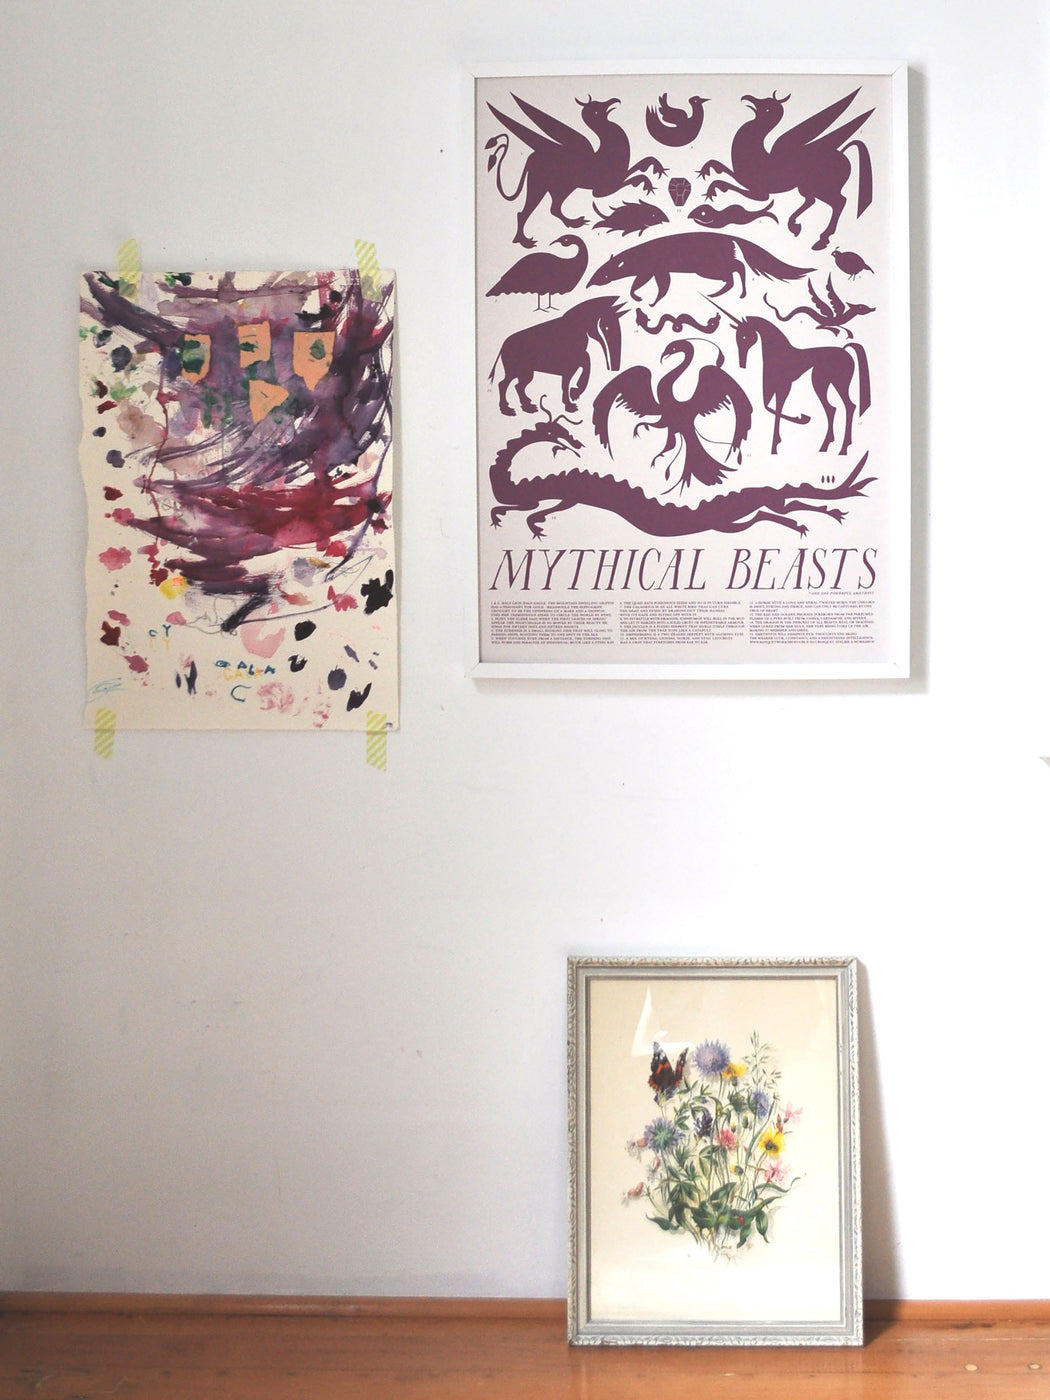 PRINT - Mythical Beasts Art Poster - plum and grey